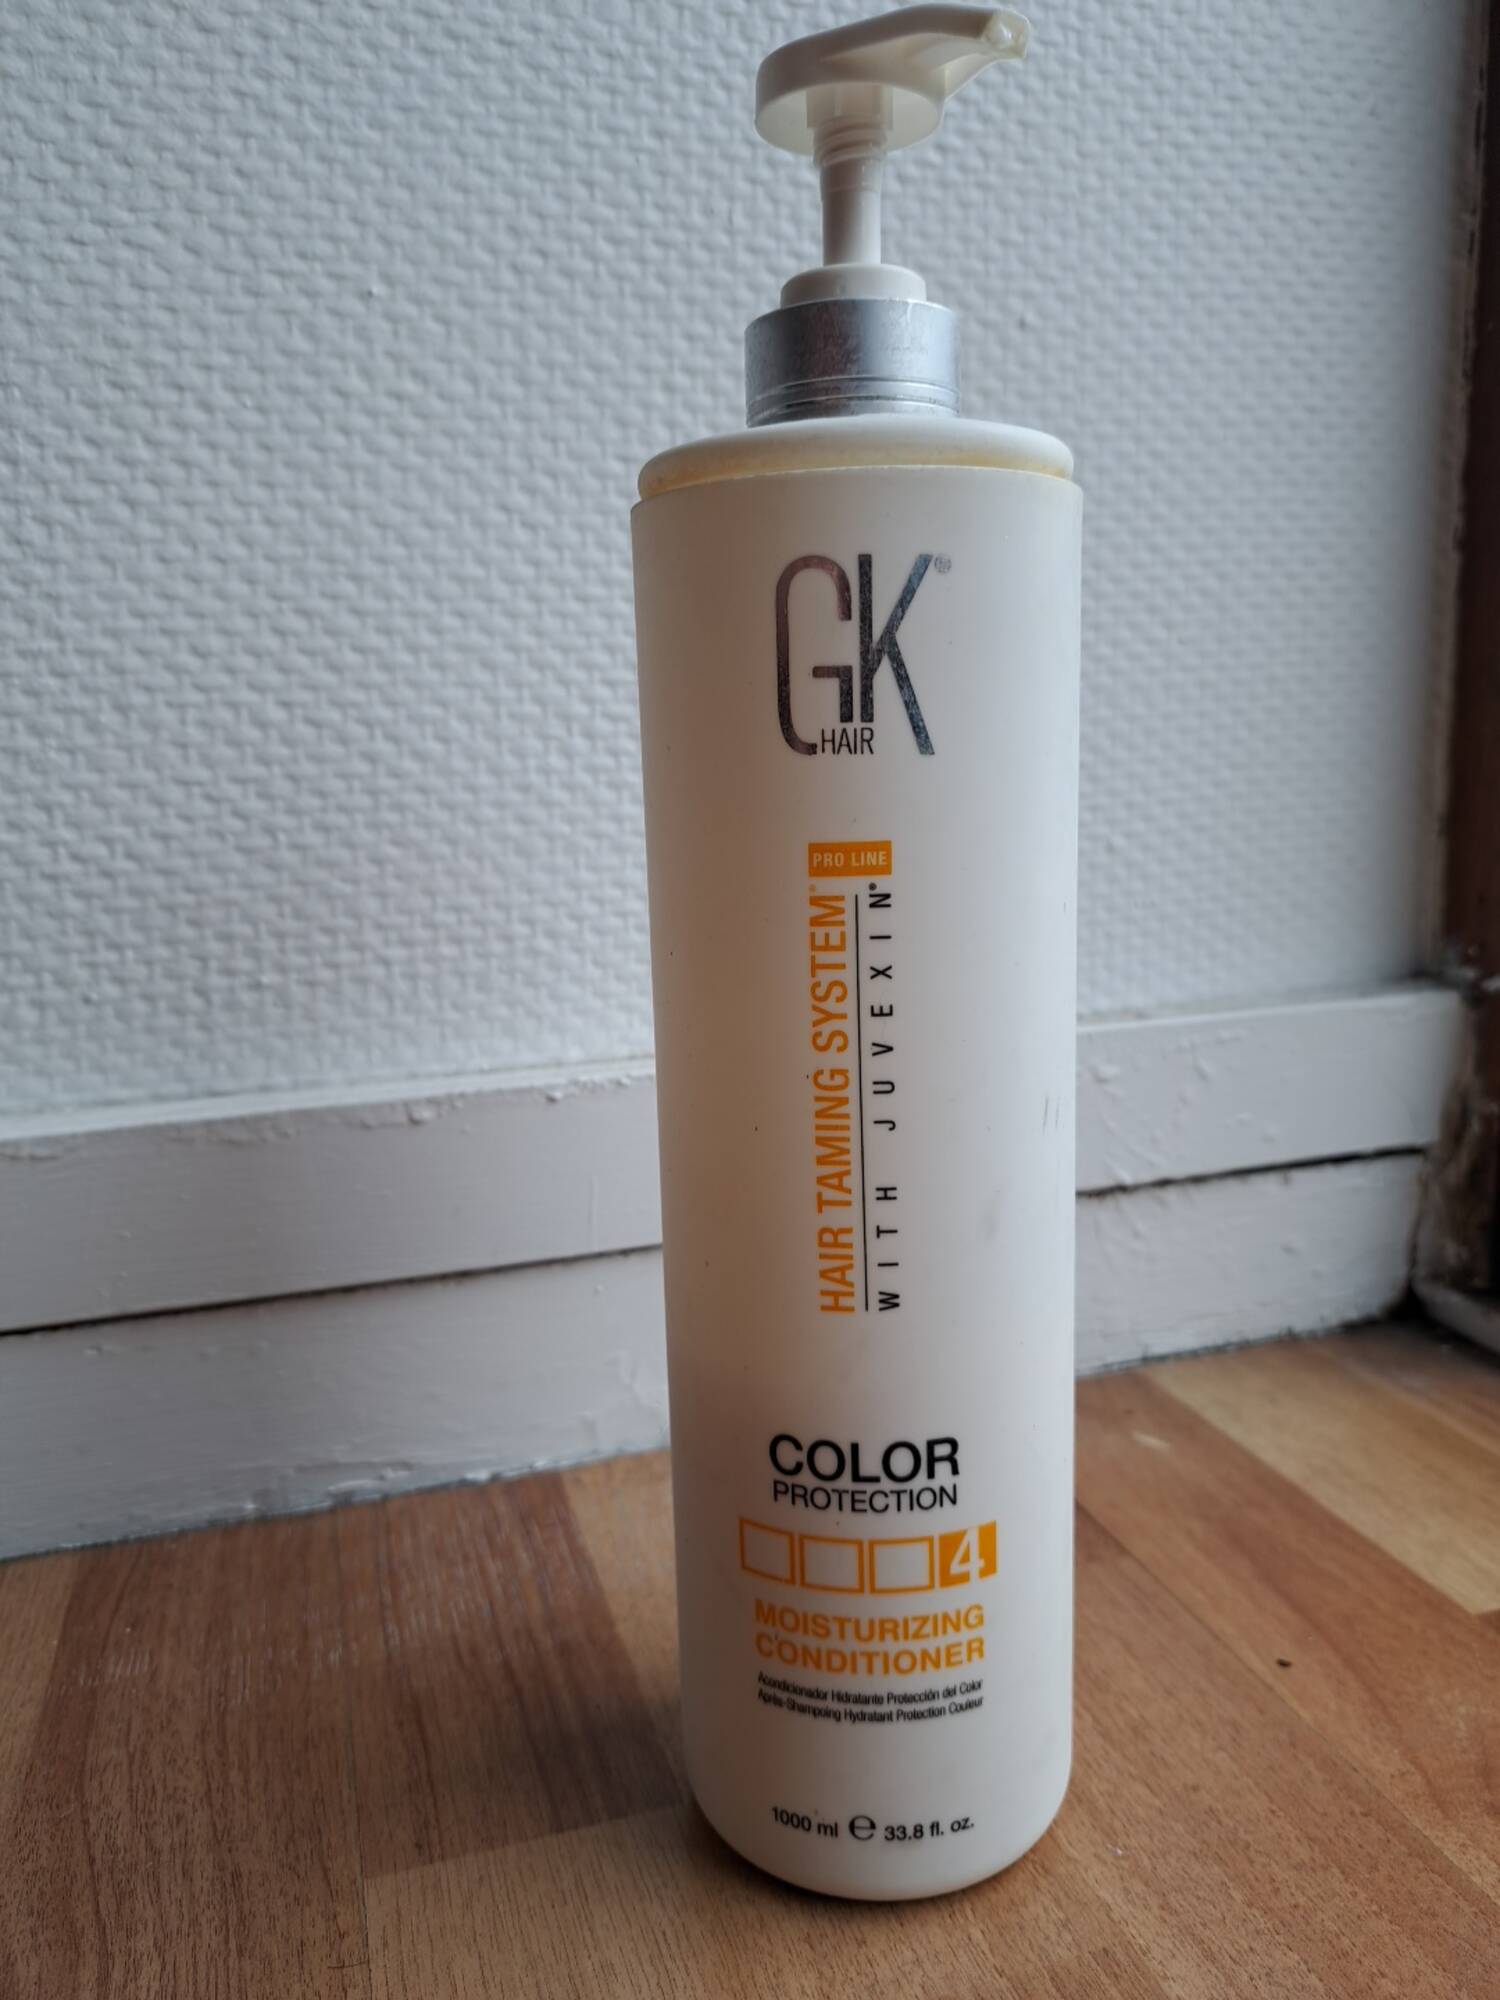 GLOBAL KERATIN - Color protection - Après-shampoing hydratant